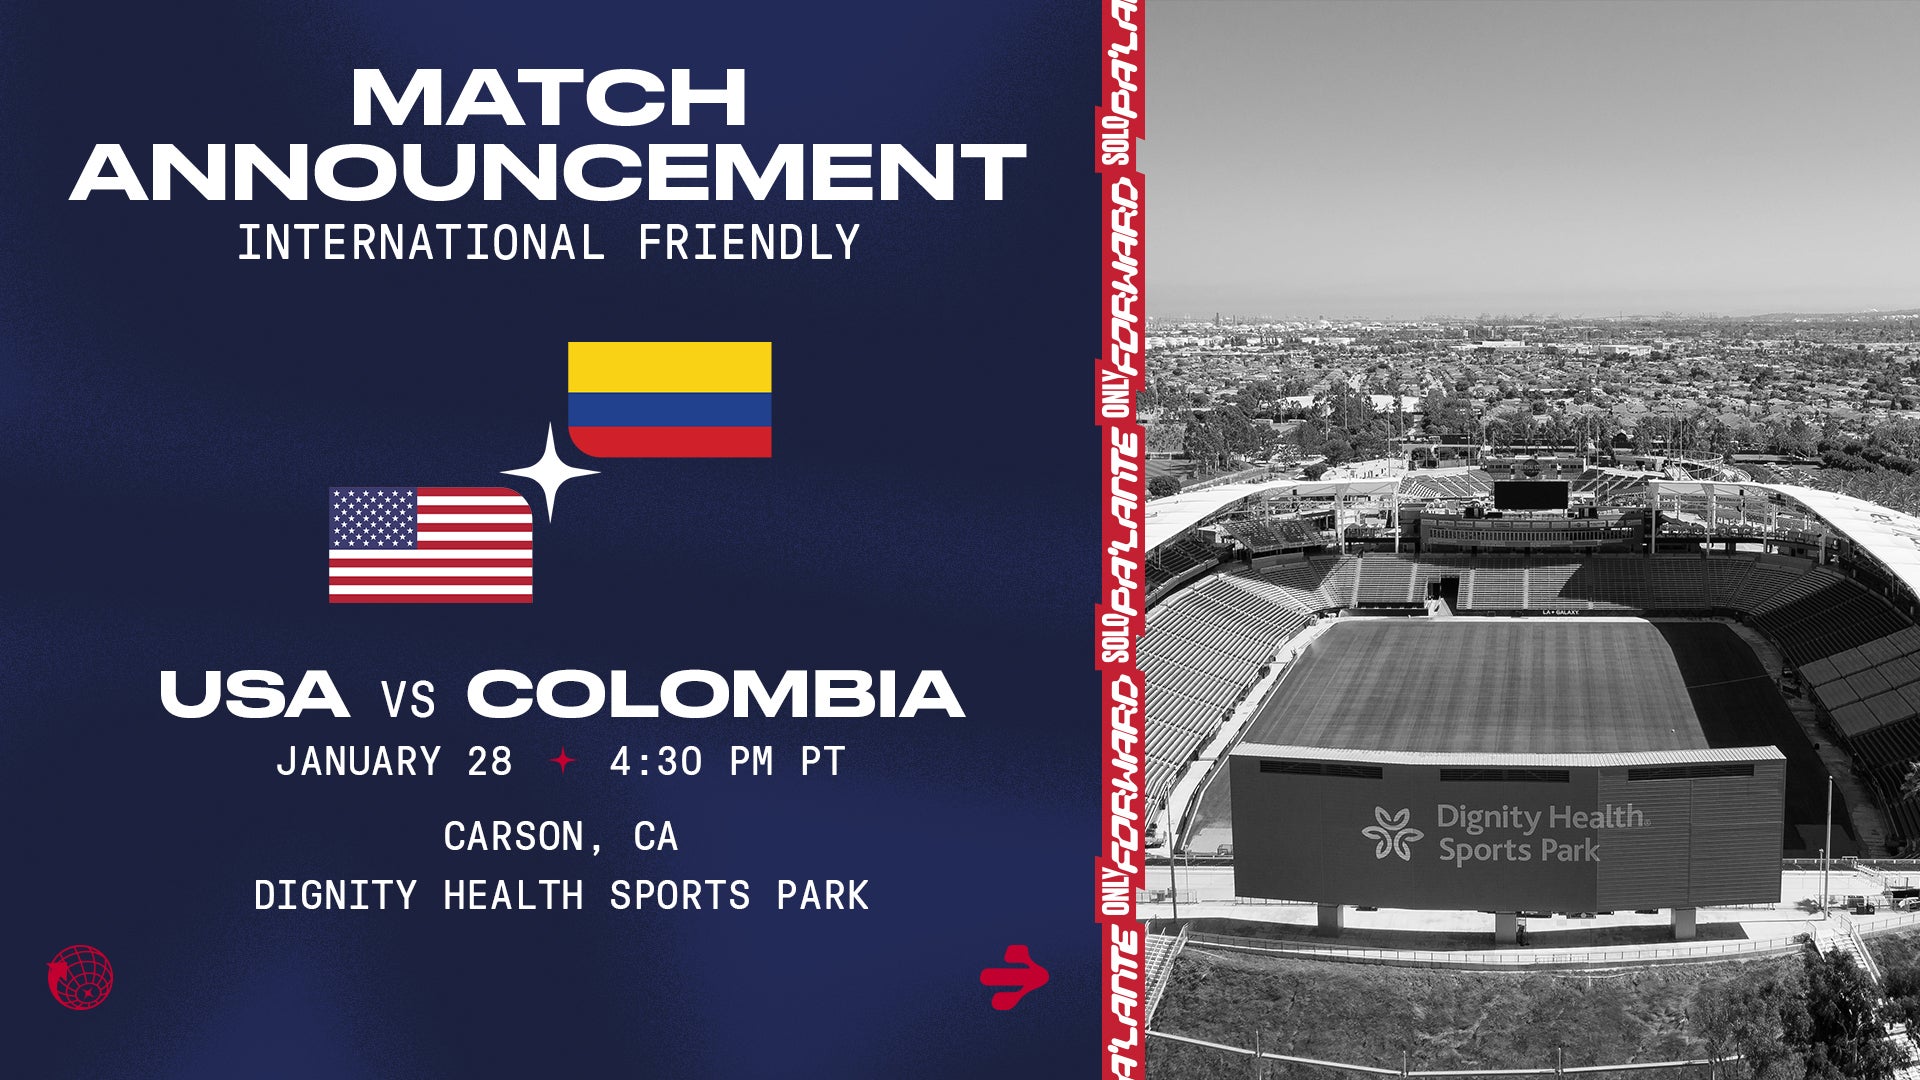 Dignity Health Sports Park to Host U.S. Men’s National Team Against Colombia on Jan. 28